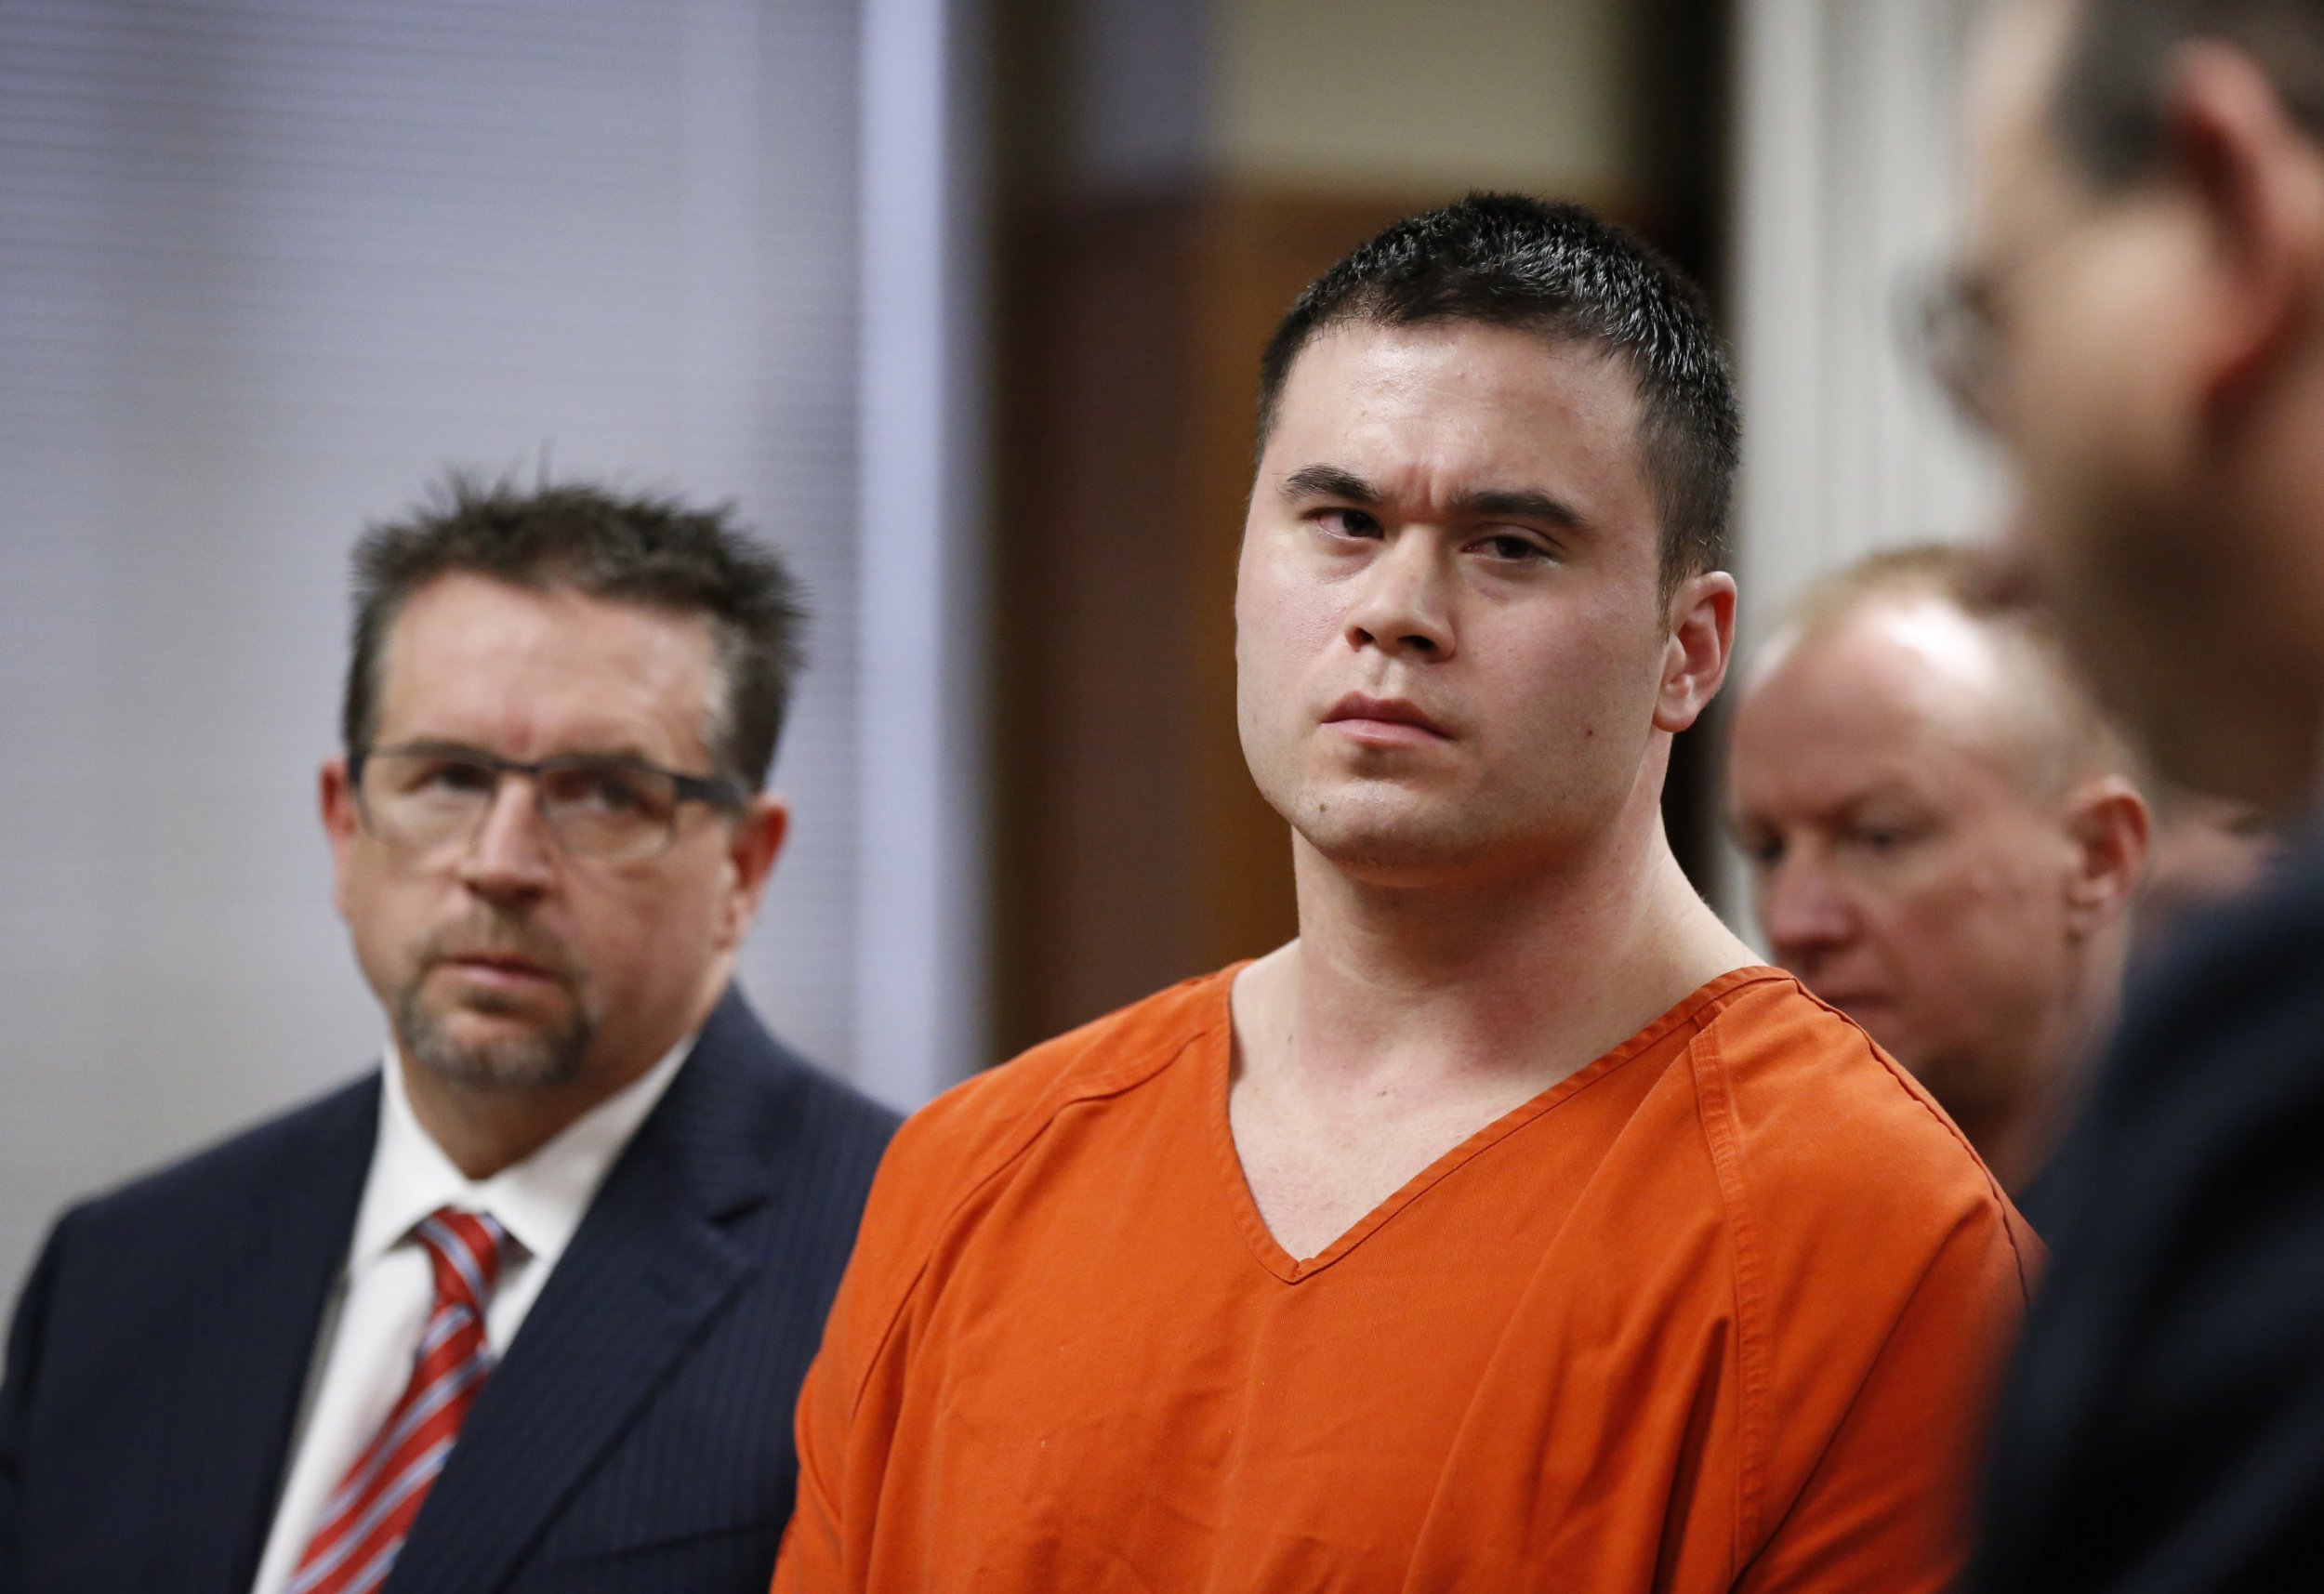 Former Police Officer Daniel Holtzclaw Sentenced To 263 Years In Prison